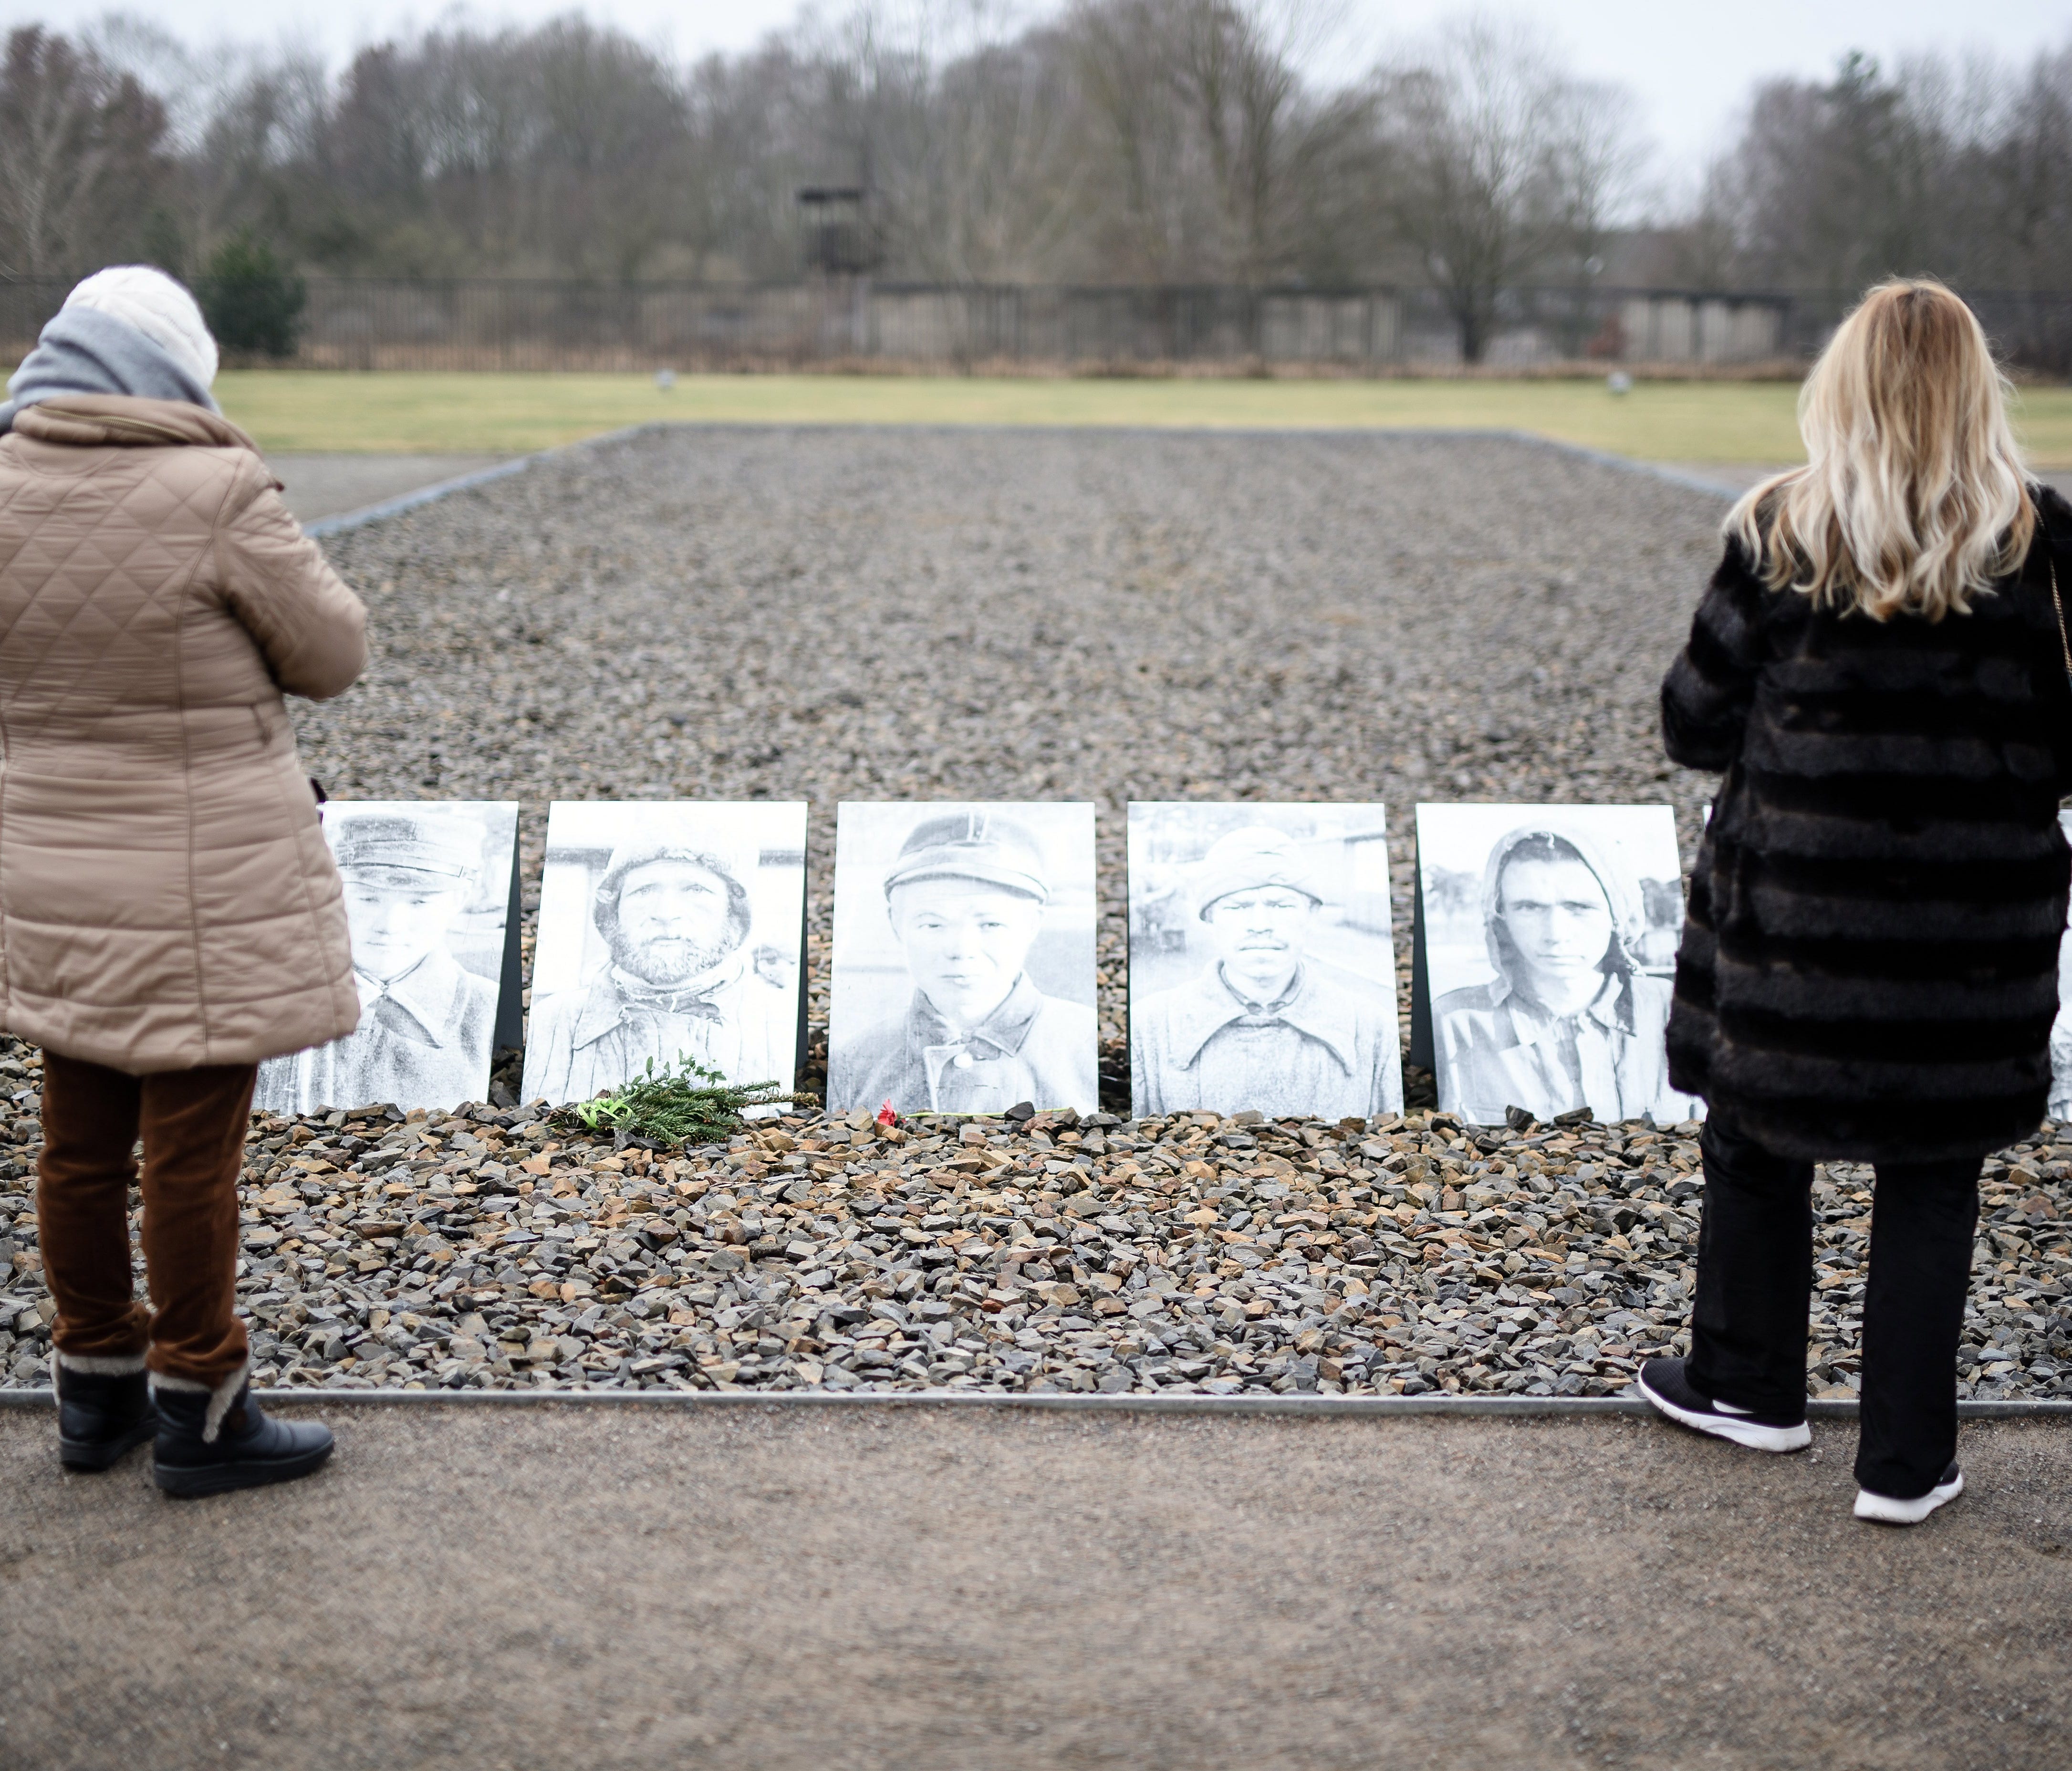 Visitors stand in front of pictures of prosecuted persons at a place, where in 1941 more than 10.000 Soviet prisoners of war were executed by being shot in the neck at the former concentration camp Sachsenhausen in Oranienburg near Berlin, on Jan. 27